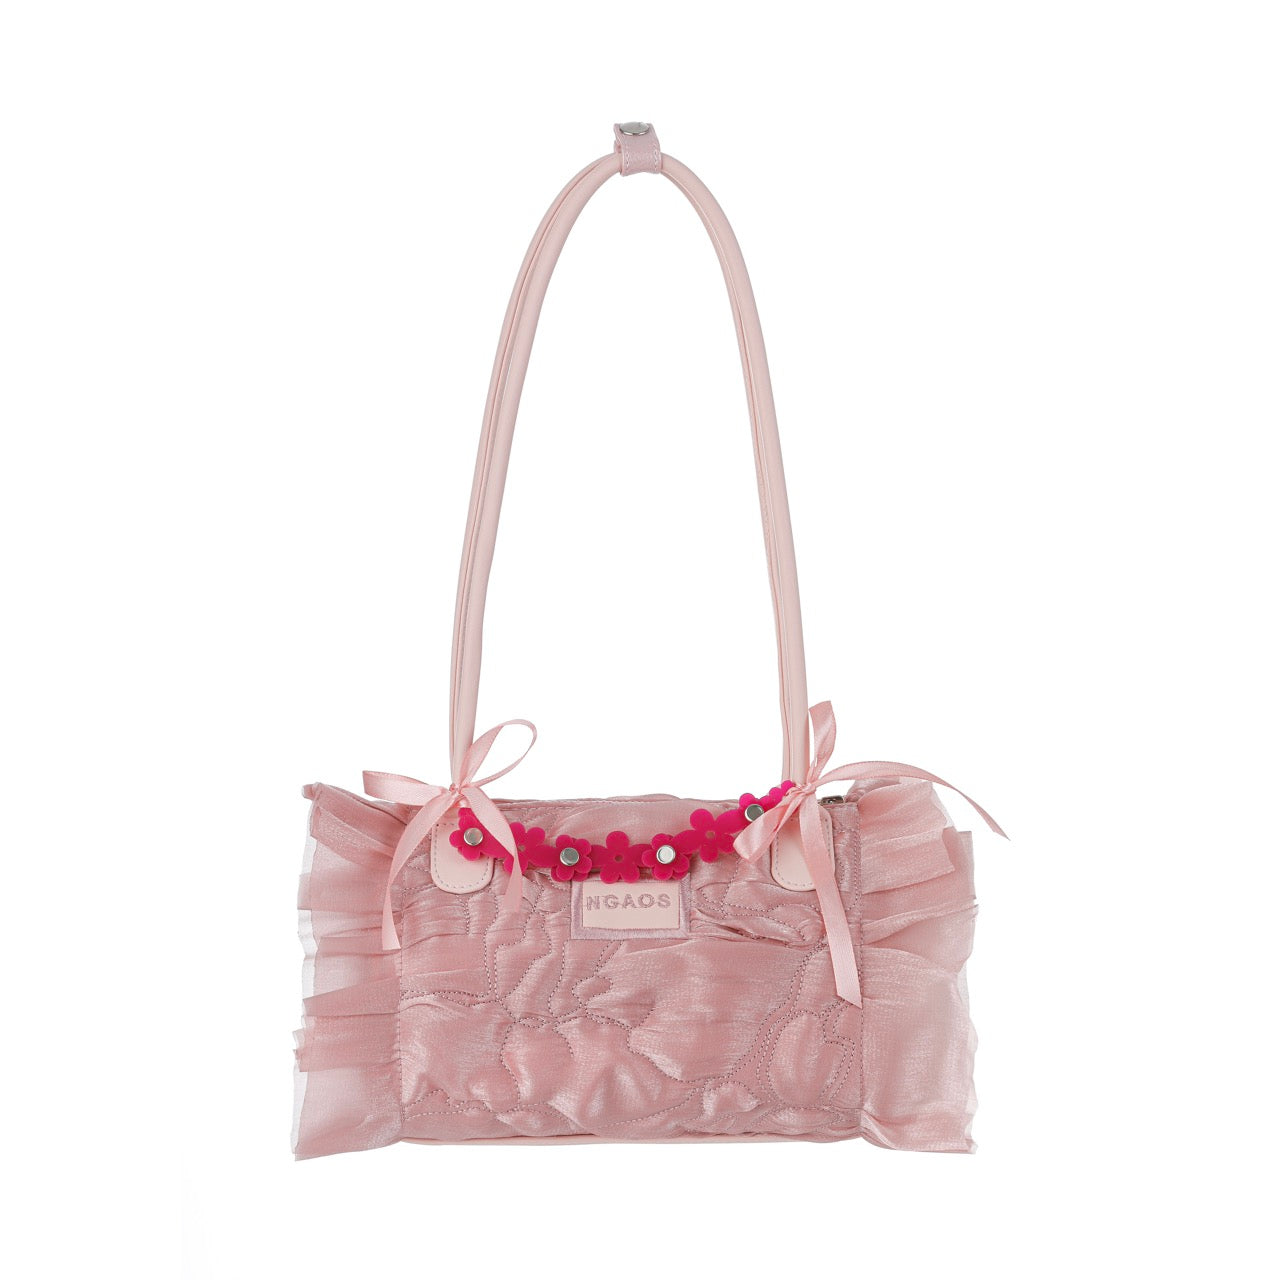 Victoria's Secret Bag For Women,White & Pink - Tote Bags price in Egypt,  Egypt